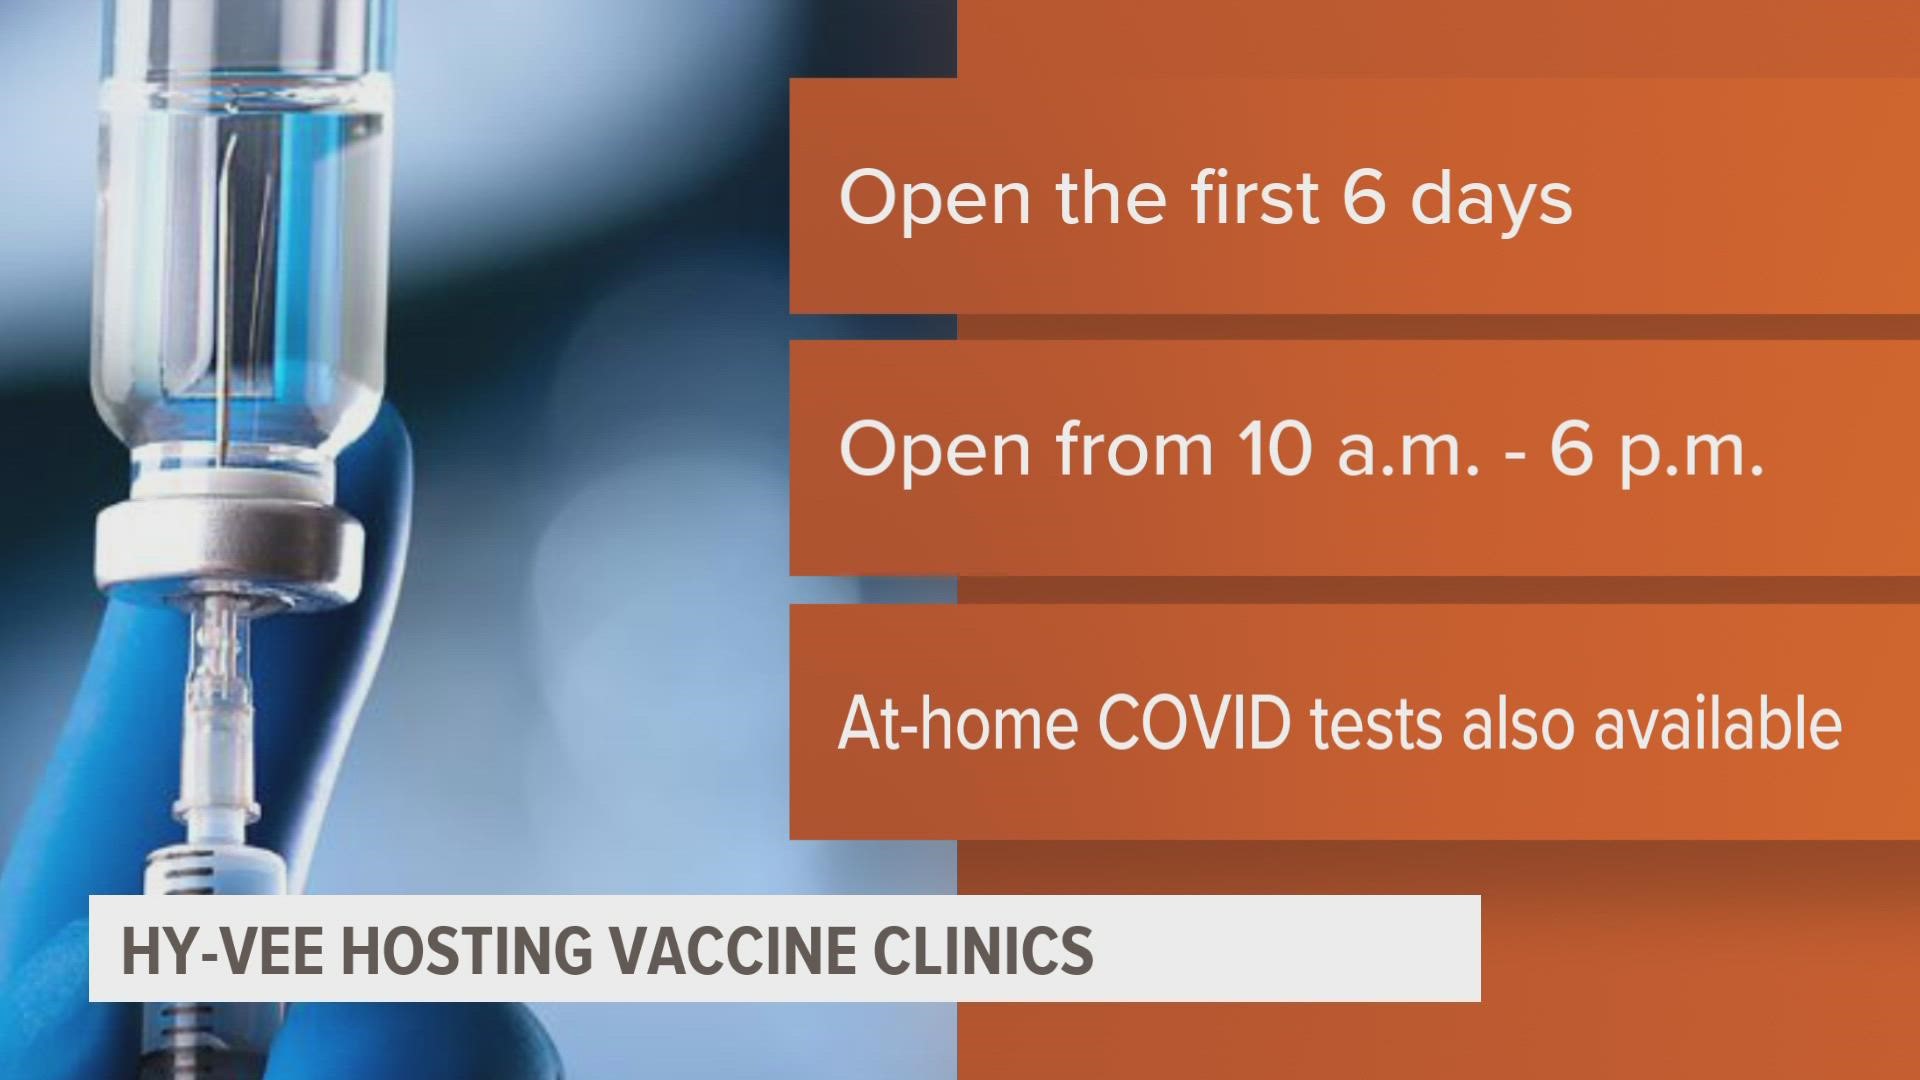 Hy-Vee will offer COVID-19, shingles and pneumonia vaccines for the first six days of the fair.